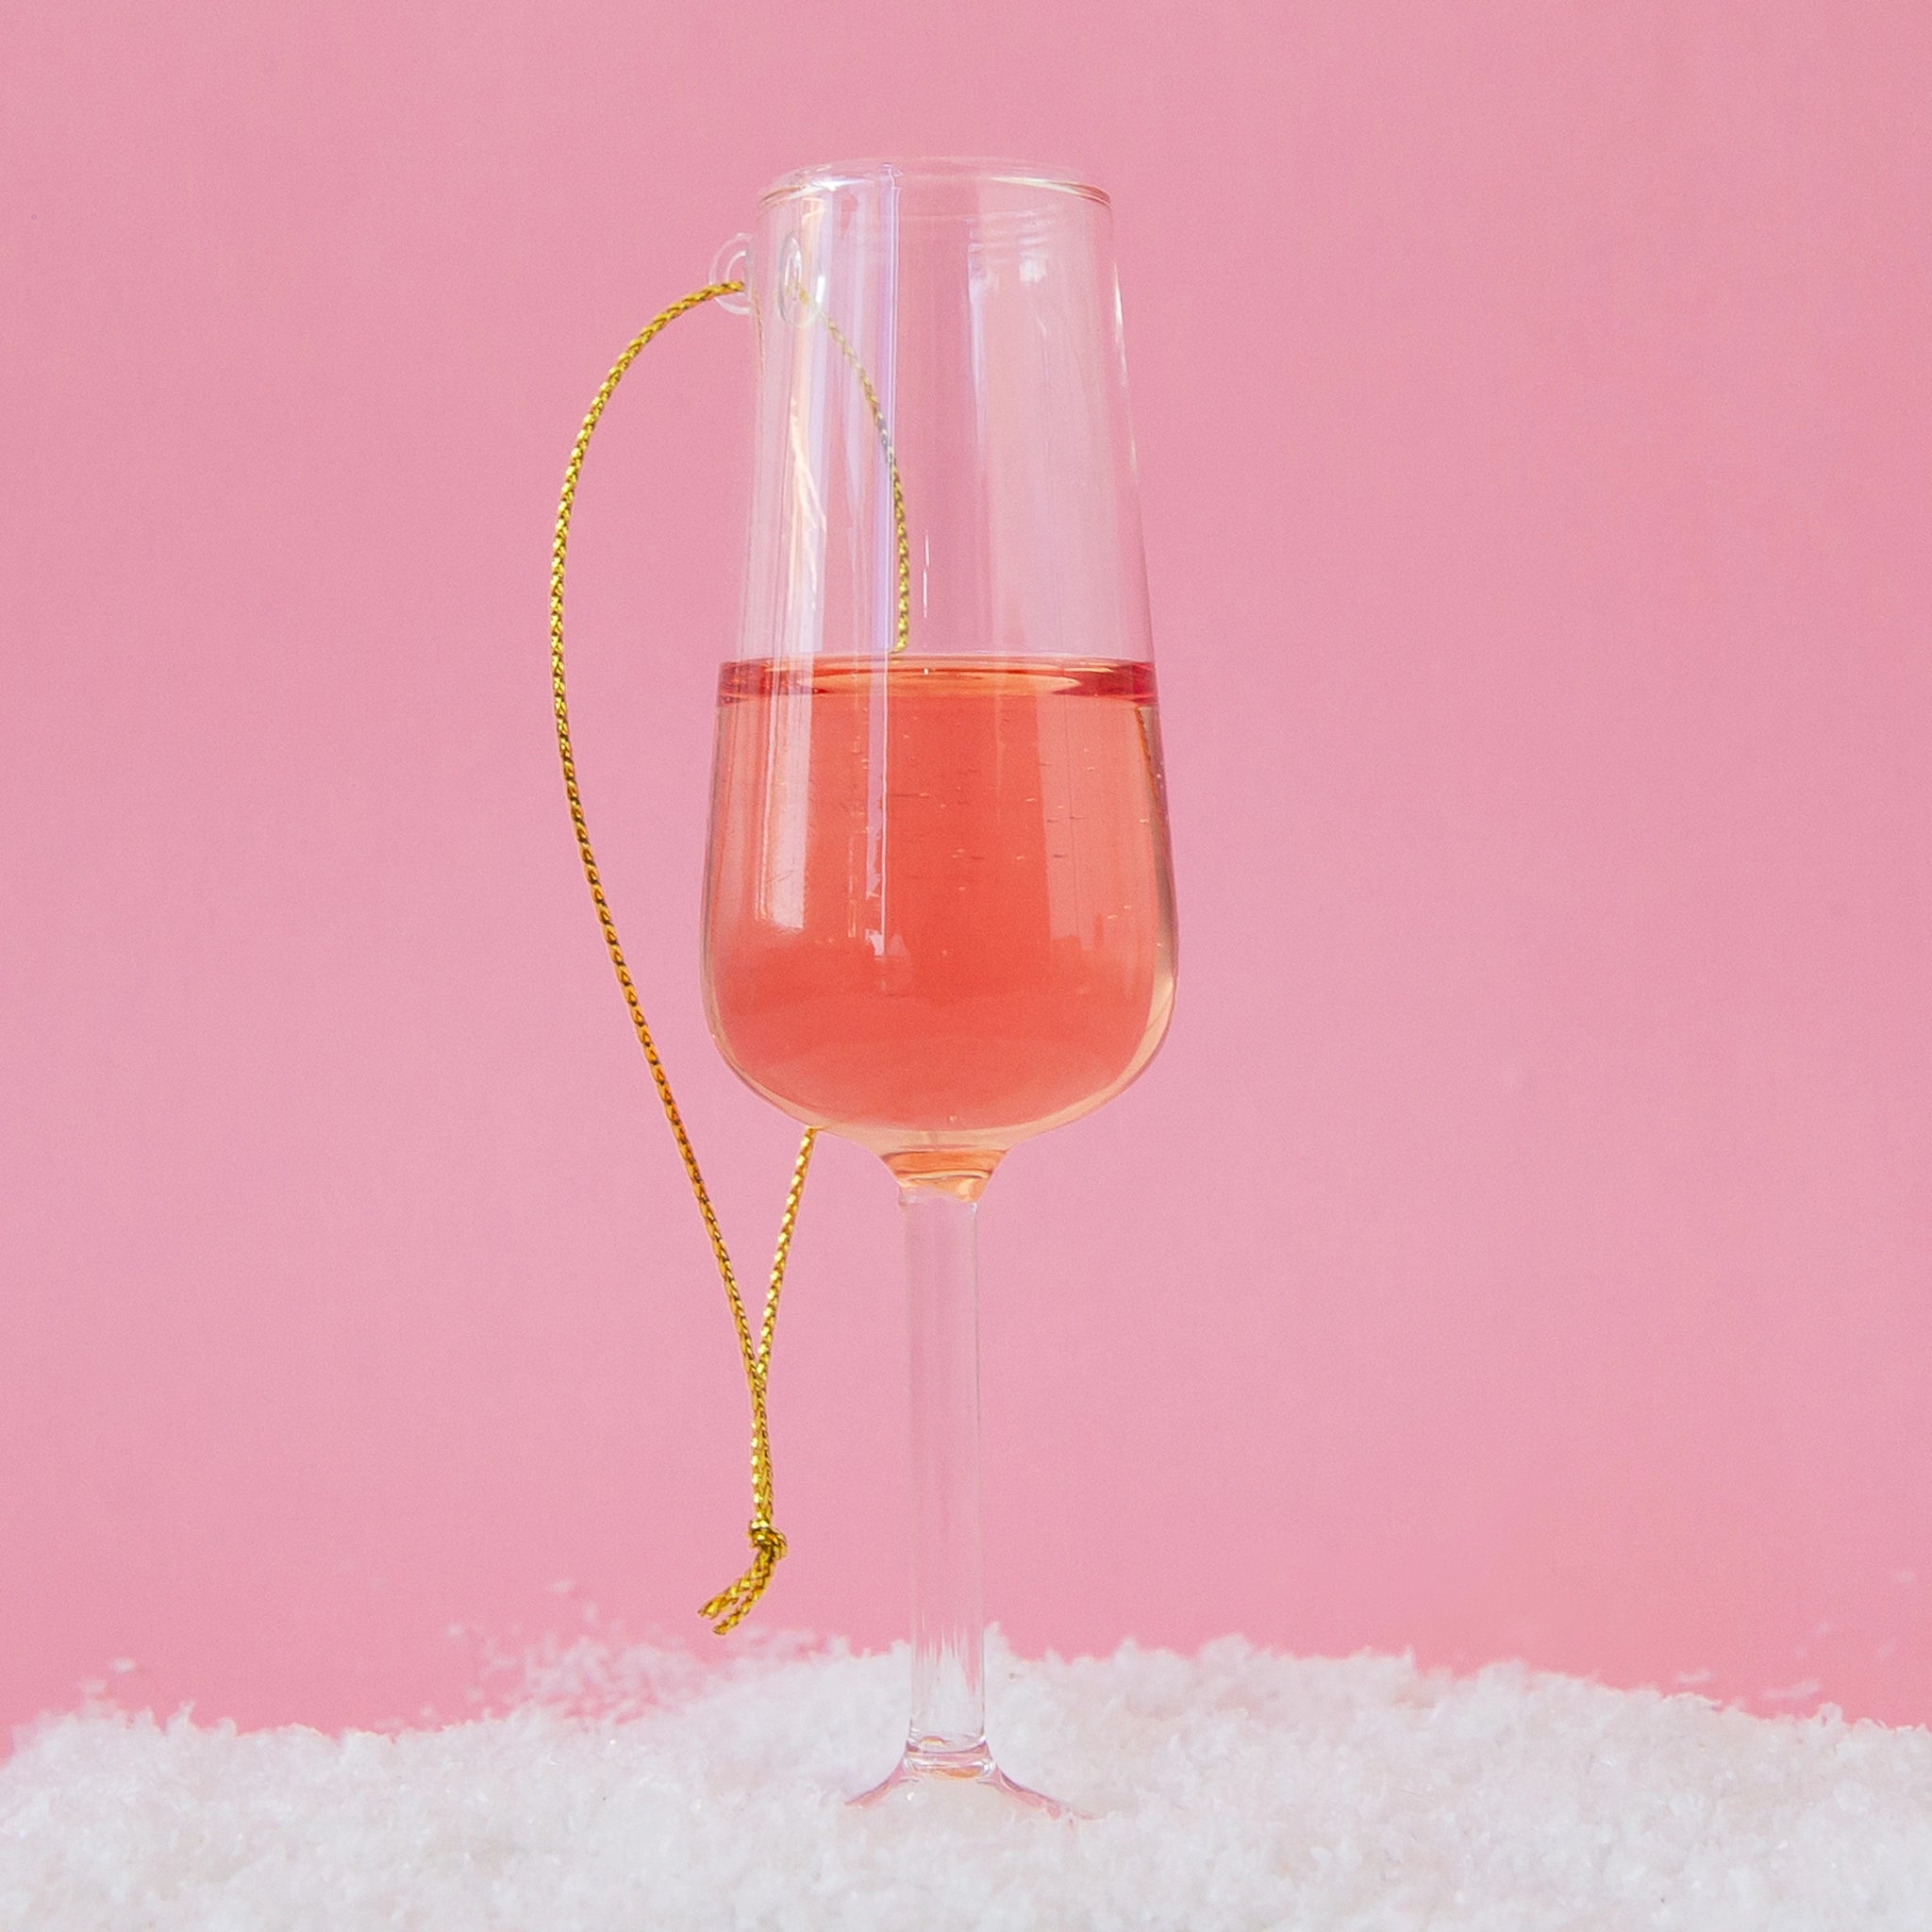 On a bright pink background is a glass ornament in the shape of a champagne flute with a pink bottom half resembling rose.